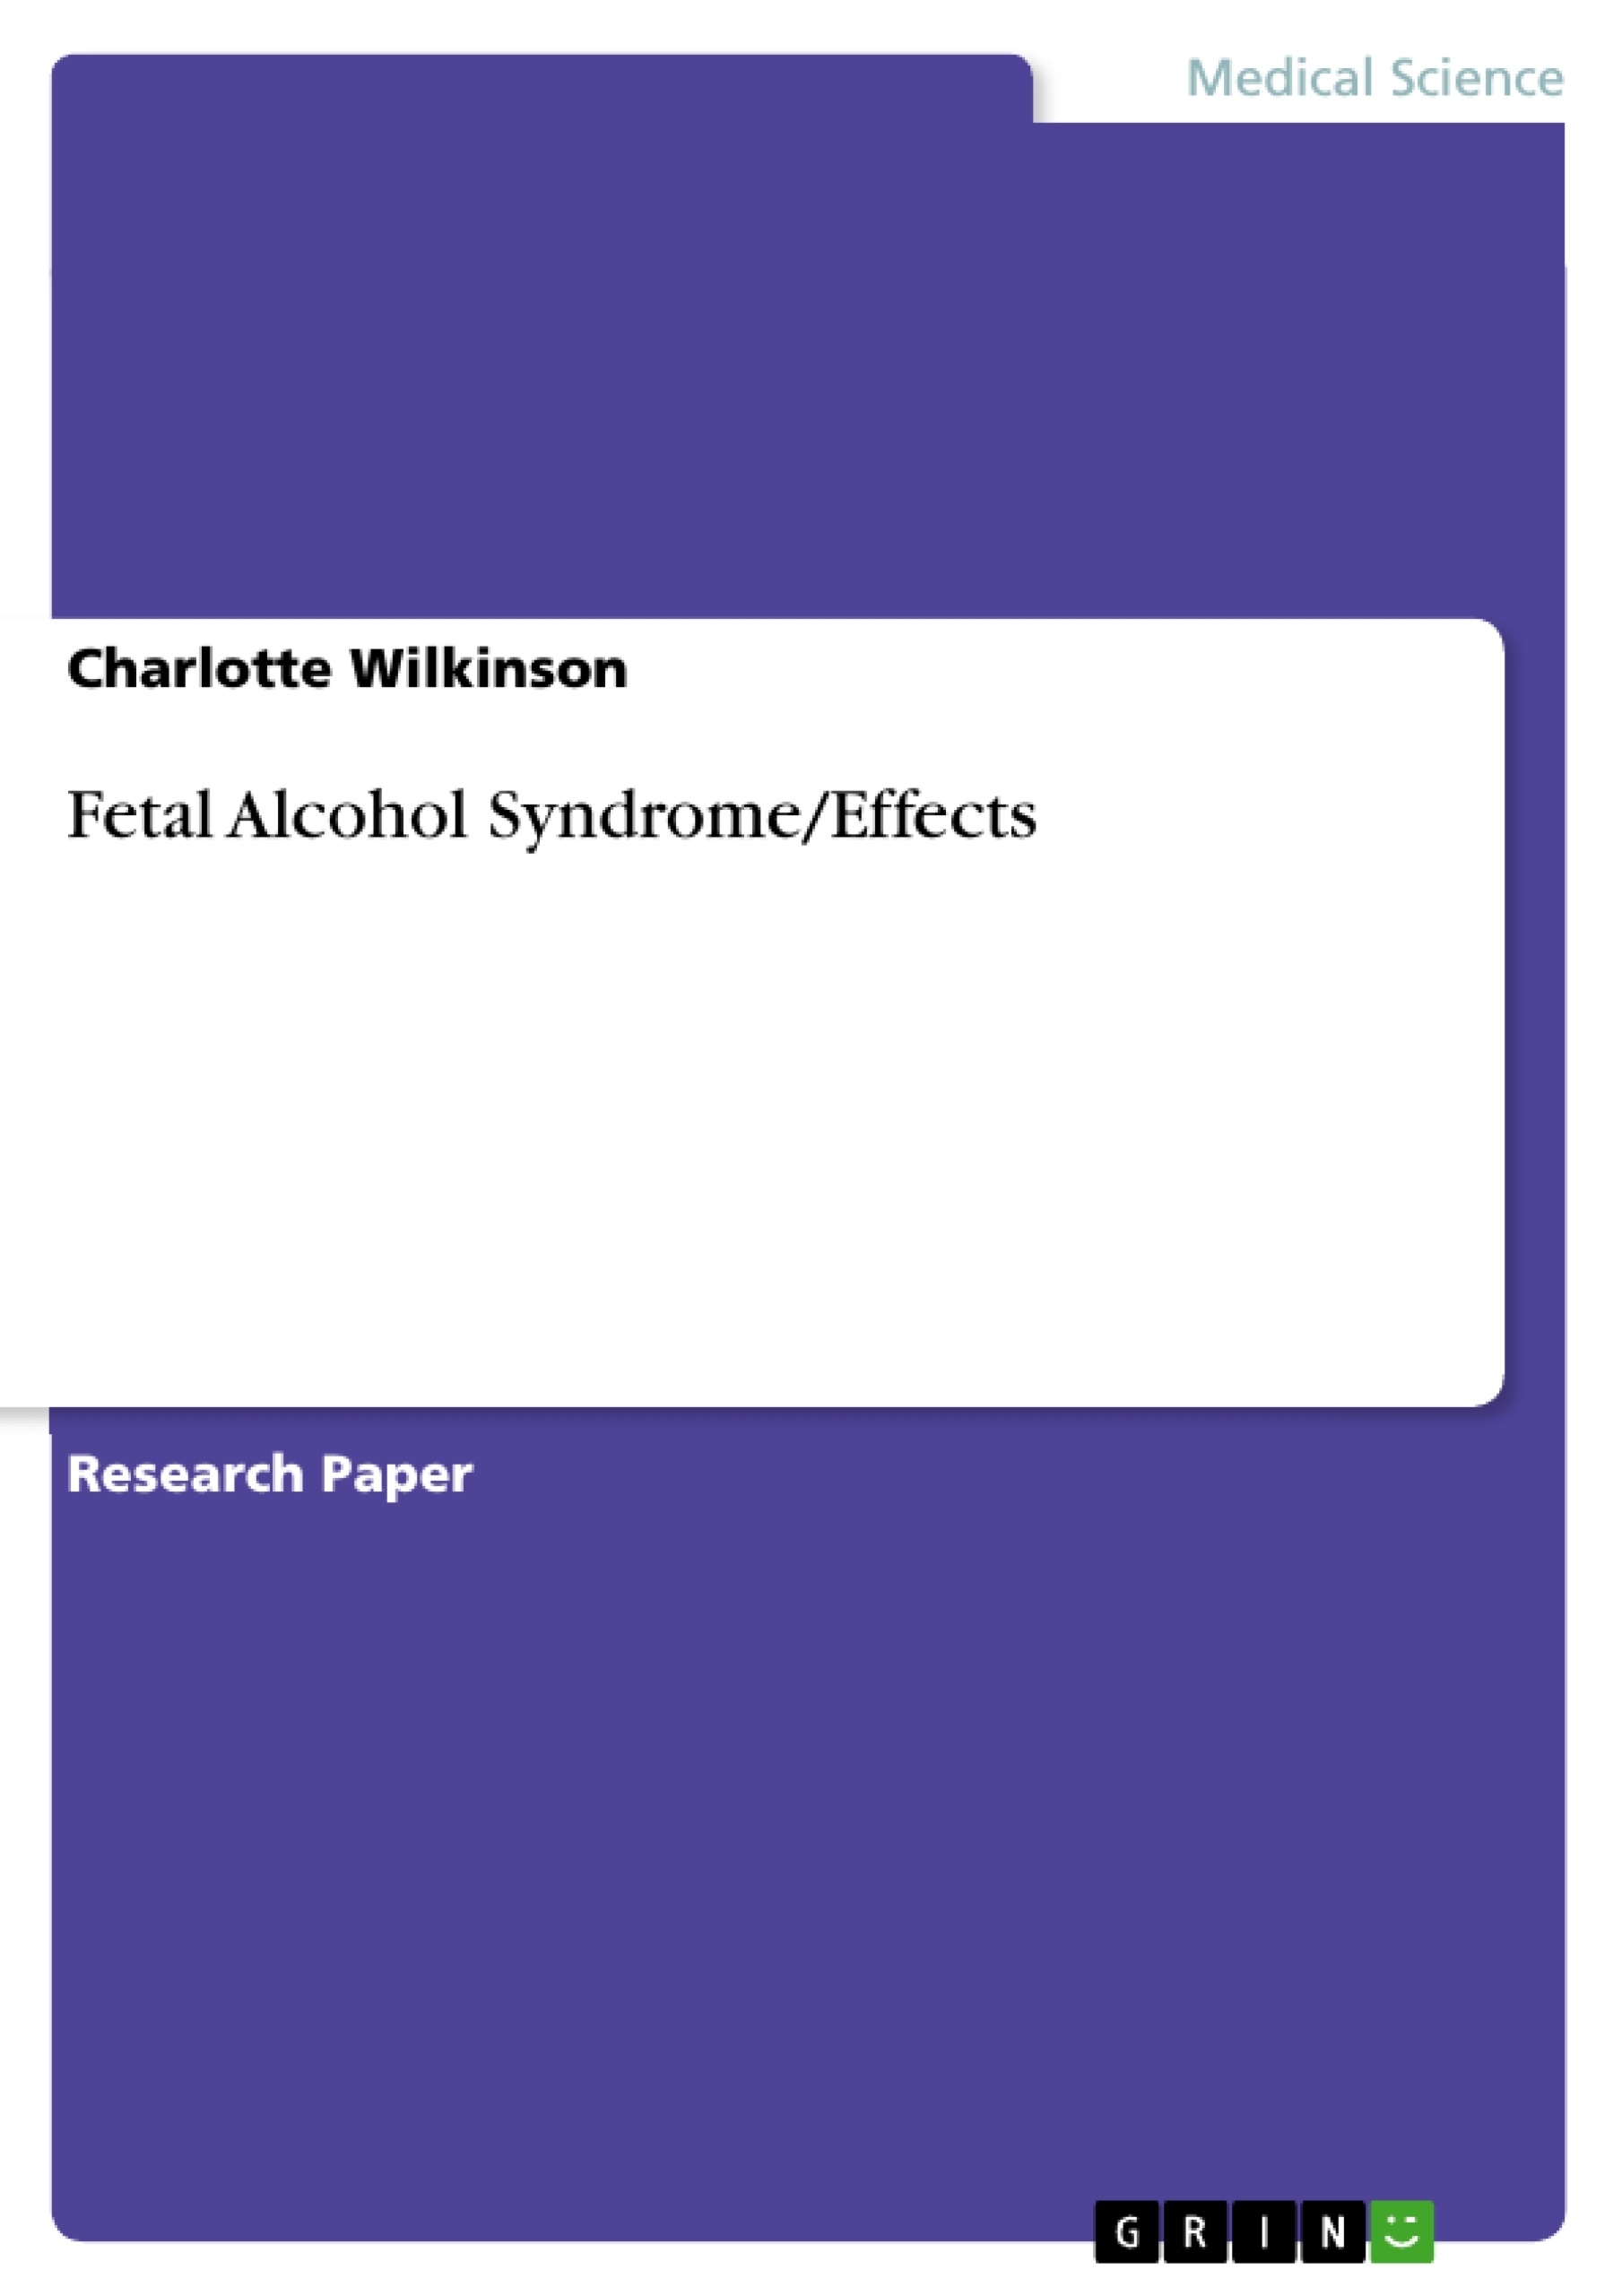 Título: Fetal Alcohol Syndrome/Effects